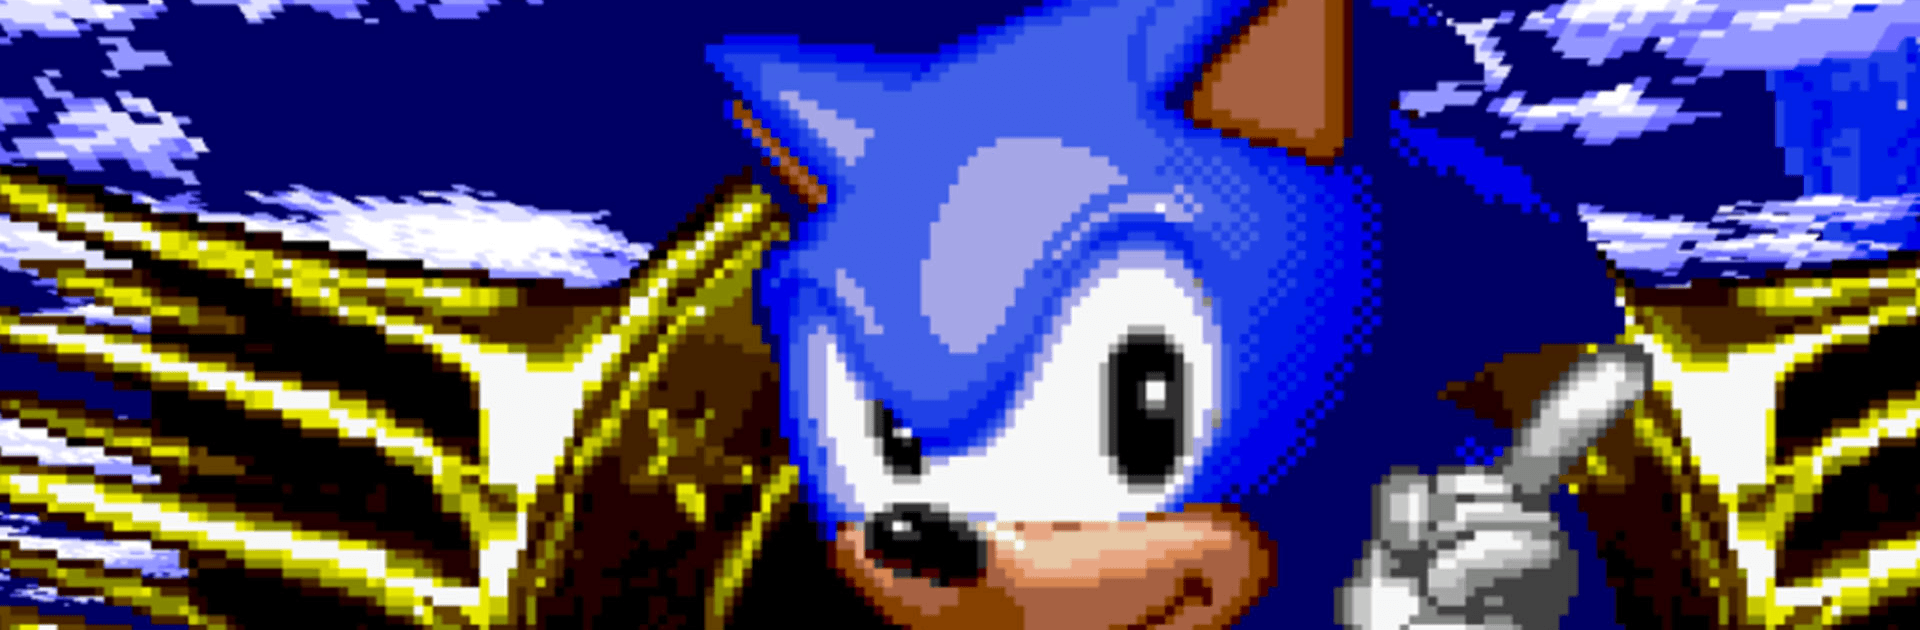 Sonic CD Classic - Apps on Google Play